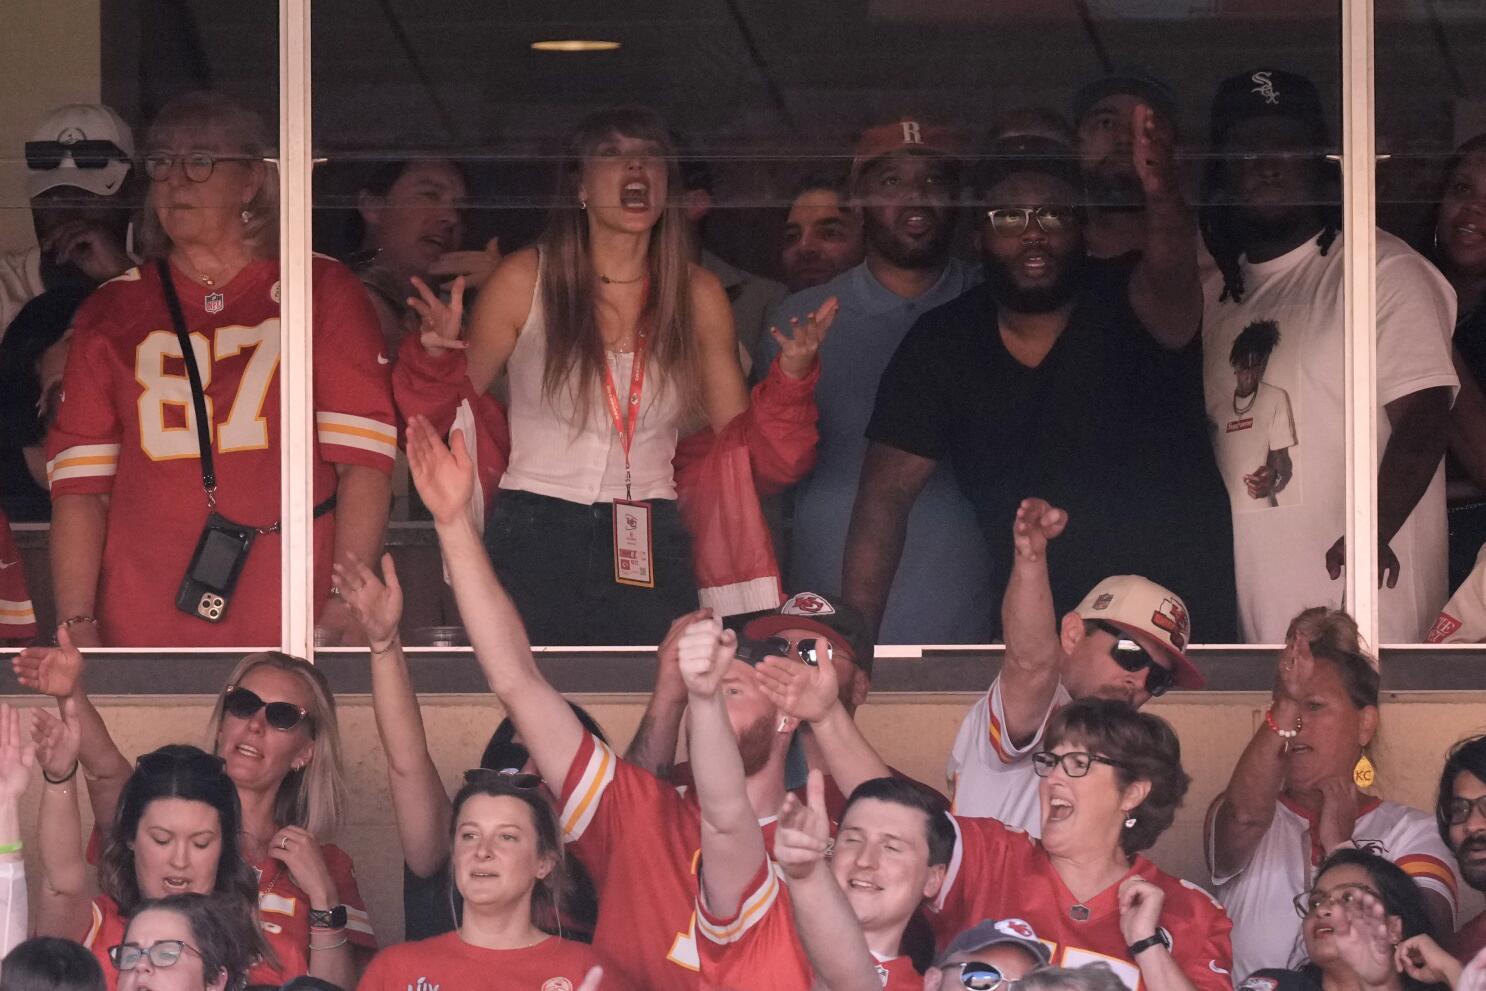 Is Travis Kelce married and does he have a daughter? Taylor Swift fuels  rumors with NFL